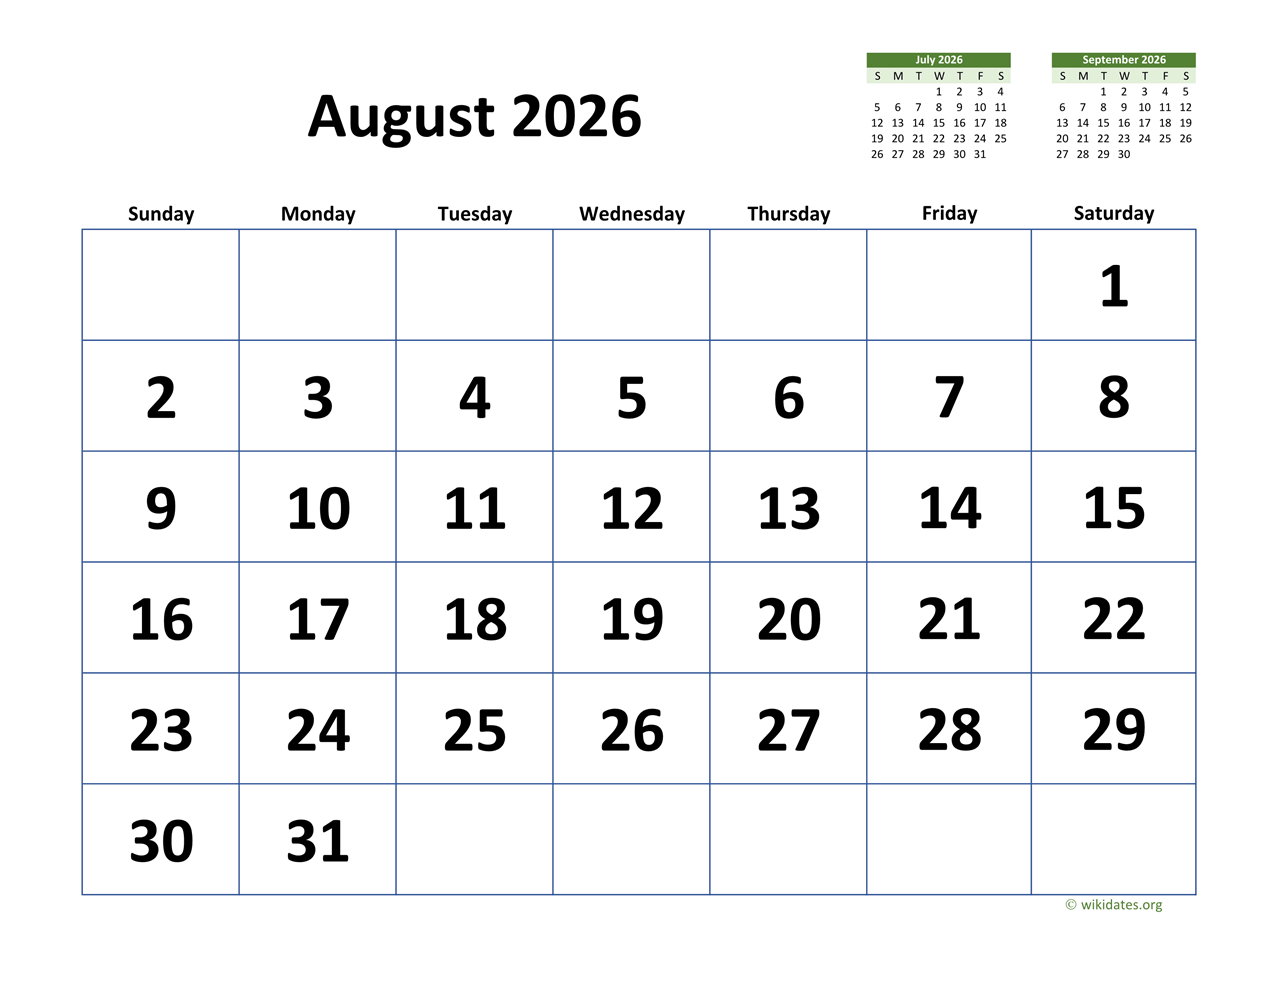 August 2026 Calendar with Extralarge Dates